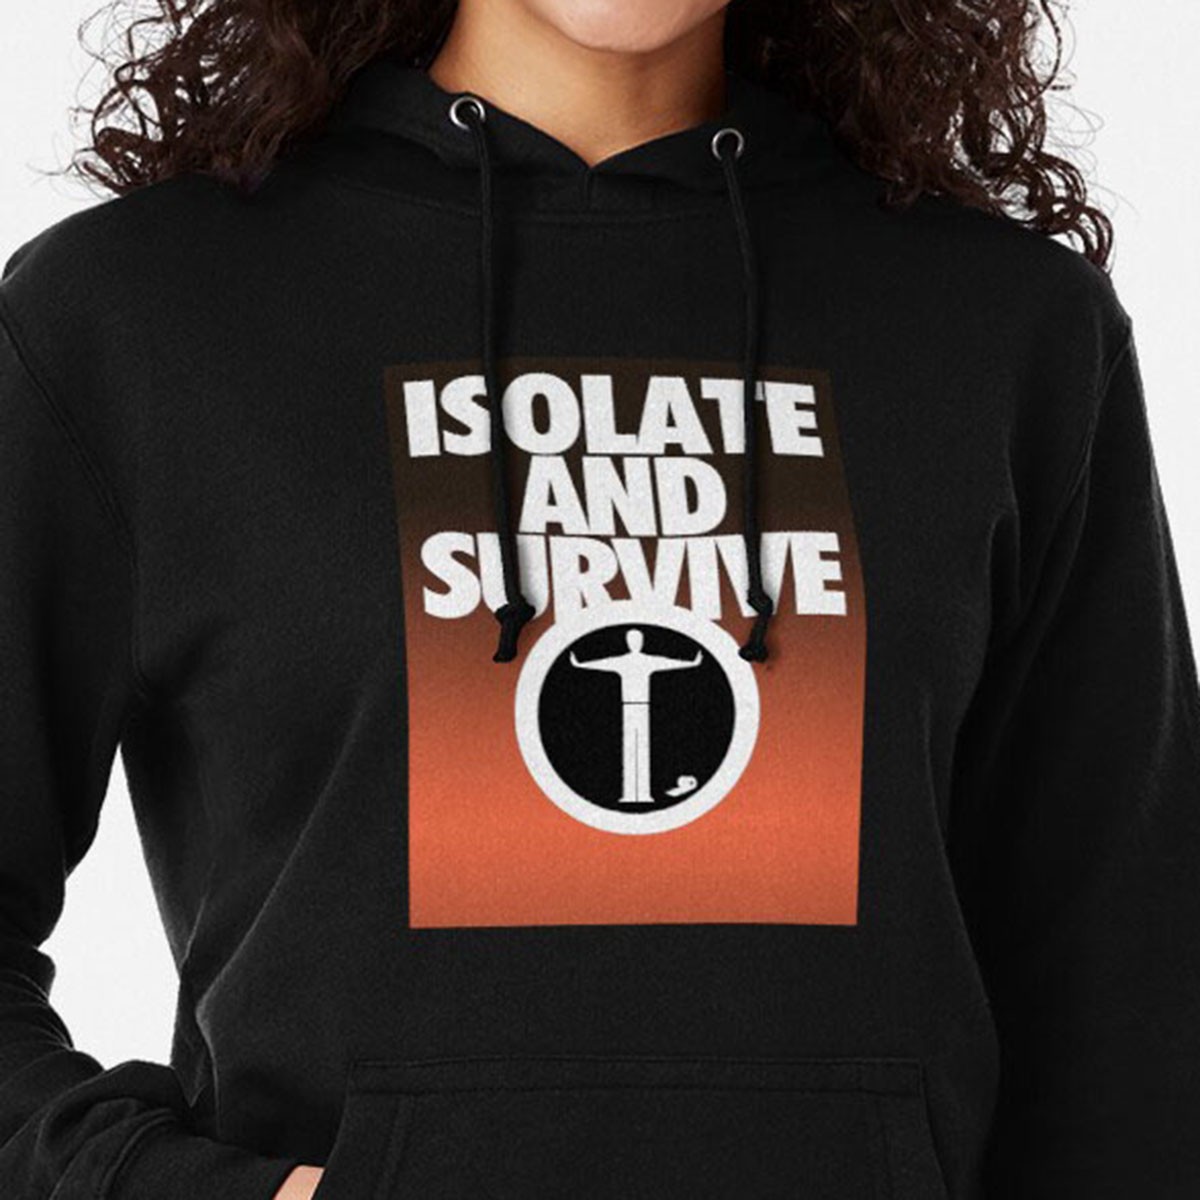 Isolate and Survive - practice social distancing lightweight hoodie - 